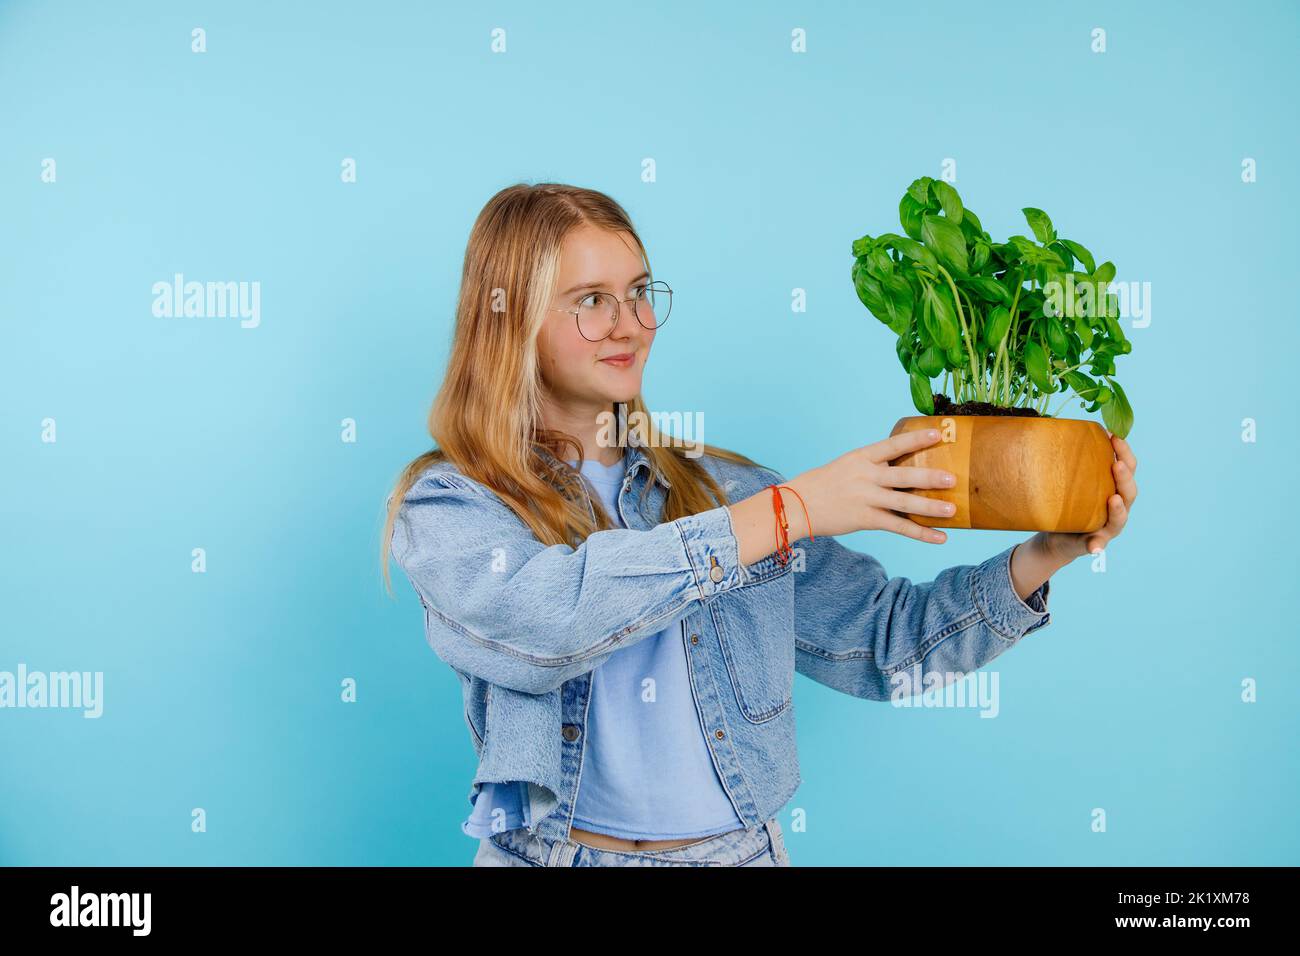 Smiling cute fashionable blonde teenager girl in jeans denim holding potted basil plant on blue background. Copy space Stock Photo